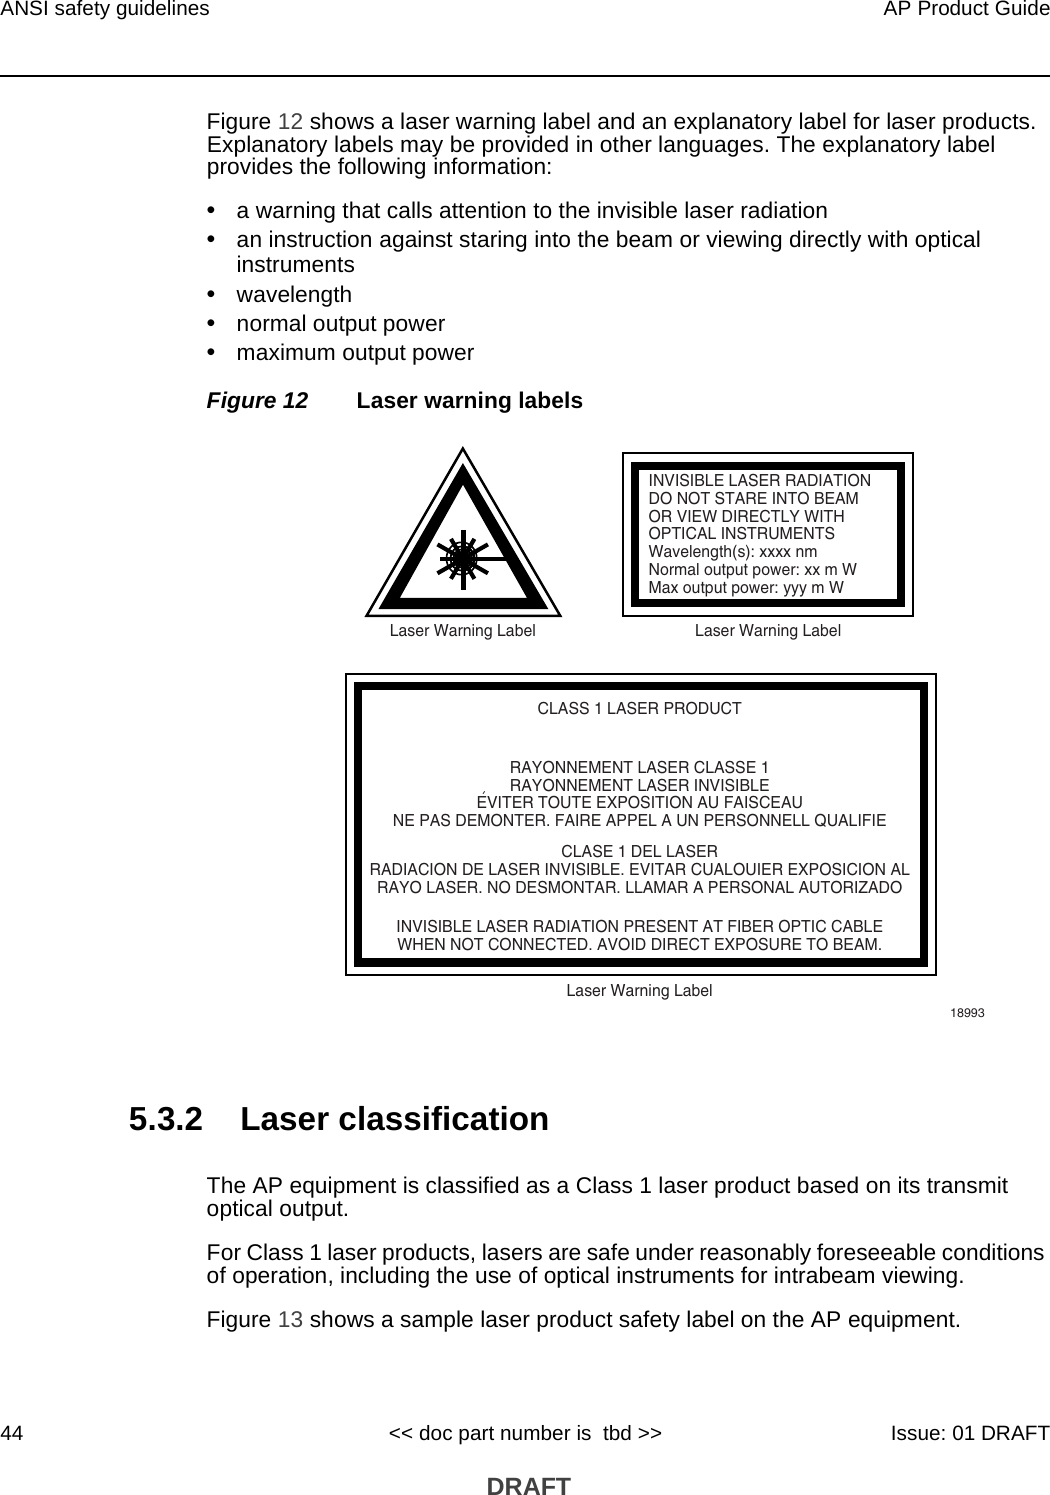 ANSI safety guidelines44AP Product Guide&lt;&lt; doc part number is  tbd &gt;&gt; Issue: 01 DRAFT DRAFTFigure 12 shows a laser warning label and an explanatory label for laser products. Explanatory labels may be provided in other languages. The explanatory label provides the following information: •a warning that calls attention to the invisible laser radiation•an instruction against staring into the beam or viewing directly with optical instruments•wavelength•normal output power•maximum output powerFigure 12 Laser warning labels5.3.2 Laser classificationThe AP equipment is classified as a Class 1 laser product based on its transmit optical output. For Class 1 laser products, lasers are safe under reasonably foreseeable conditions of operation, including the use of optical instruments for intrabeam viewing.Figure 13 shows a sample laser product safety label on the AP equipment.INVISIBLE LASER RADIATIONDO NOT STARE INTO BEAMOR VIEW DIRECTLY WITHOPTICAL INSTRUMENTSWavelength(s): xxxx nmNormal output power: xx m WMax output power: yyy m WLaser Warning Label Laser Warning LabelCLASS 1 LASER PRODUCTINVISIBLE LASER RADIATION PRESENT AT FIBER OPTIC CABLEWHEN NOT CONNECTED. AVOID DIRECT EXPOSURE TO BEAM.RAYONNEMENT LASER CLASSE 1RAYONNEMENT LASER INVISIBLEEVITER TOUTE EXPOSITION AU FAISCEAUNE PAS DEMONTER. FAIRE APPEL A UN PERSONNELL QUALIFIECLASE 1 DEL LASERRADIACION DE LASER INVISIBLE. EVITAR CUALOUIER EXPOSICION ALRAYO LASER. NO DESMONTAR. LLAMAR A PERSONAL AUTORIZADOLaser Warning Label18993&apos;